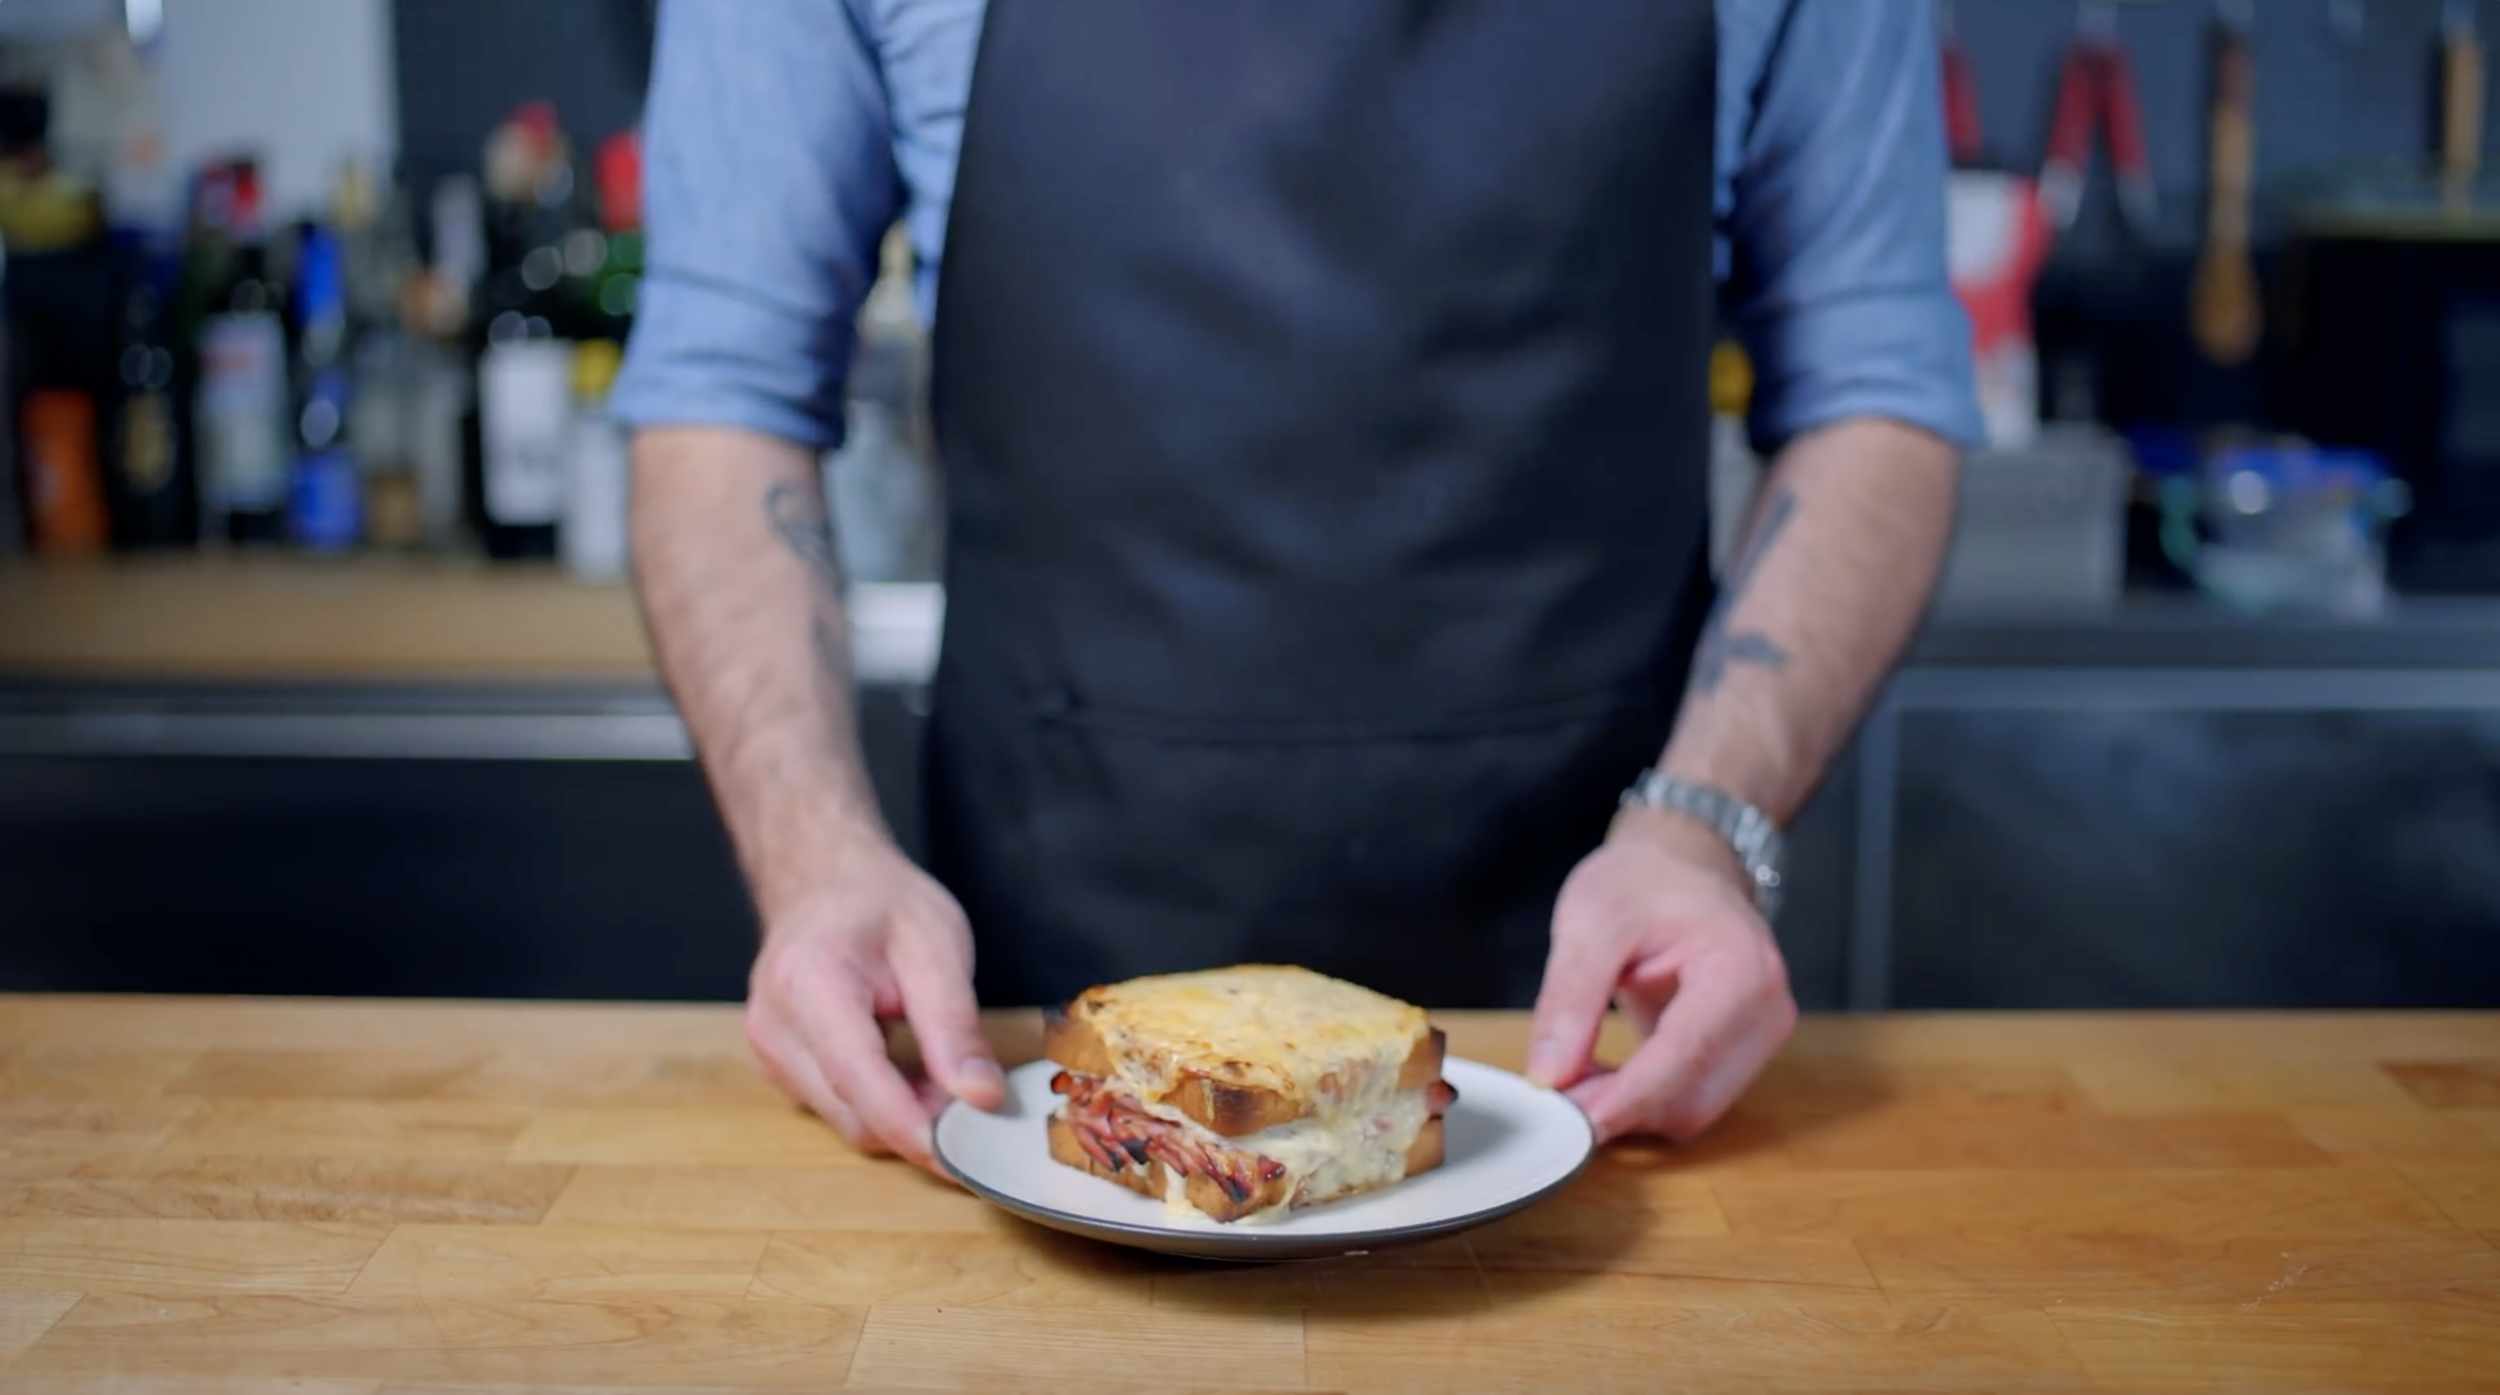 Picture for Croque Monsieur inspired by Brooklyn Nine-Nine